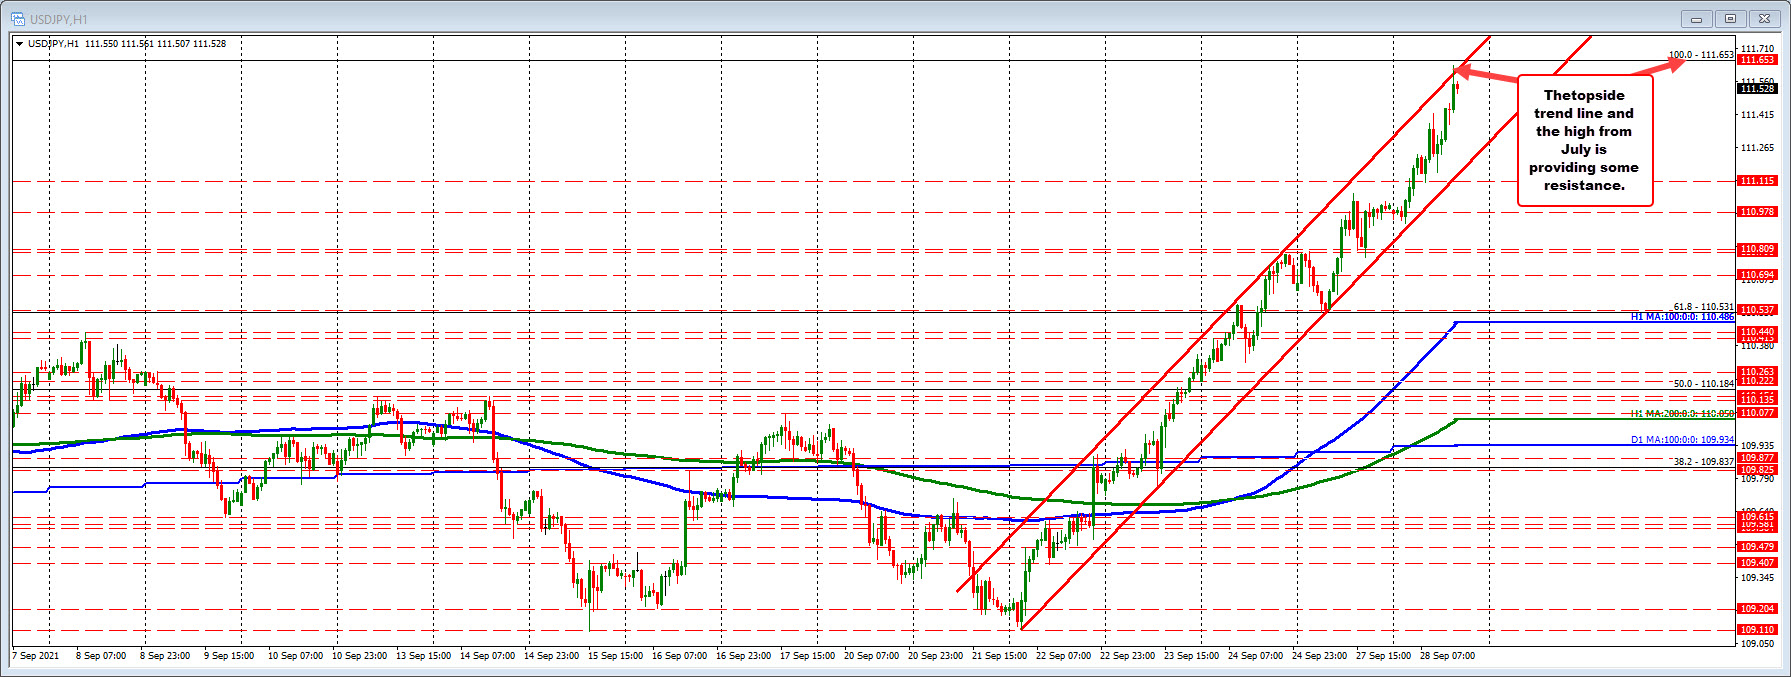 USDJPY trades within a channel